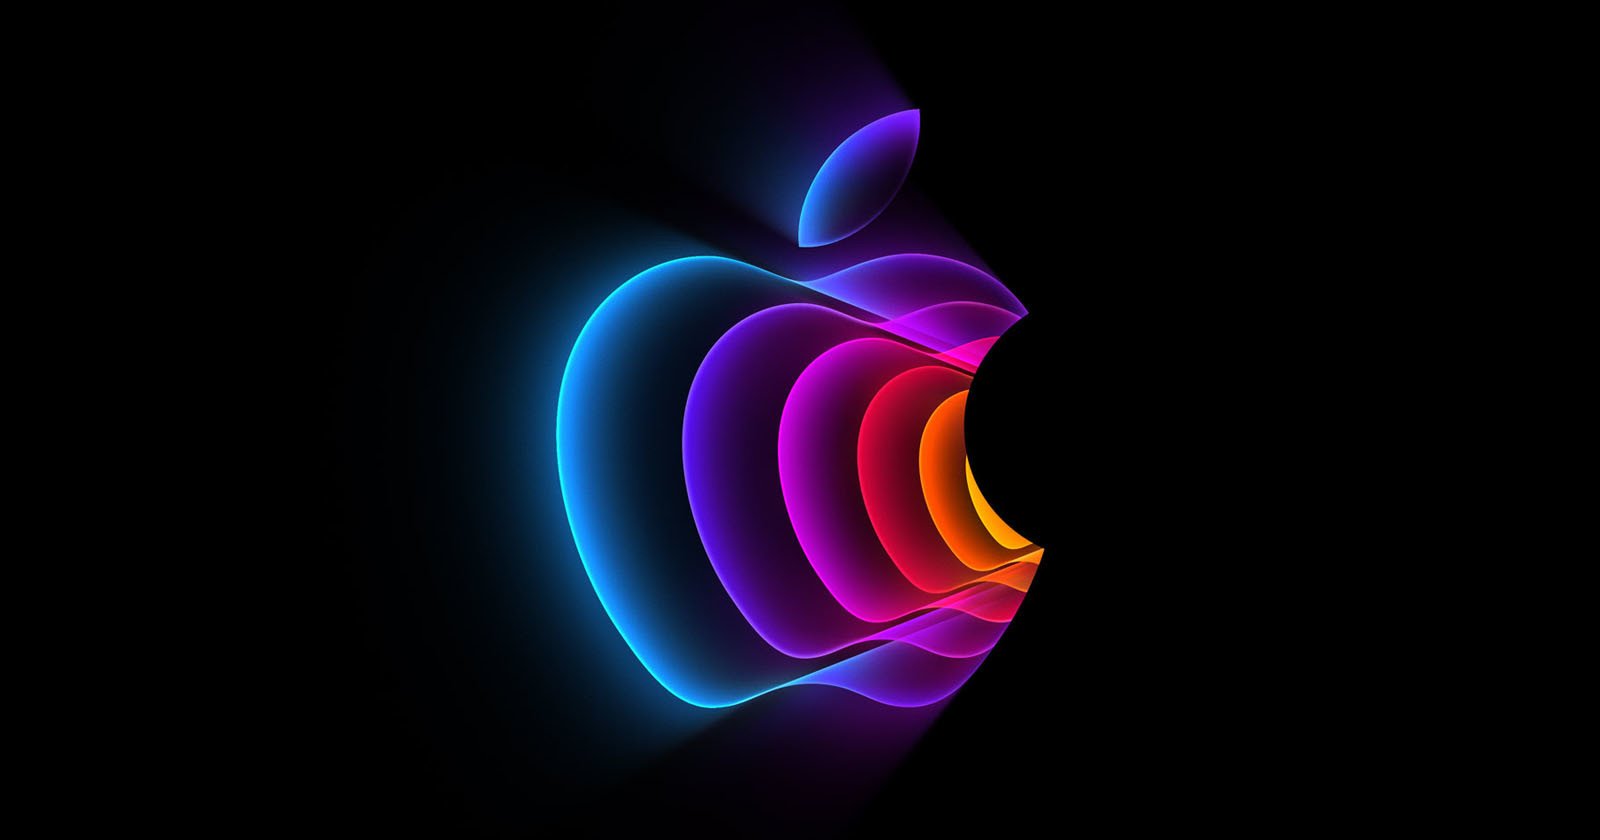 Apple Confirms Hardware Event for March 8: Heres What to Expect